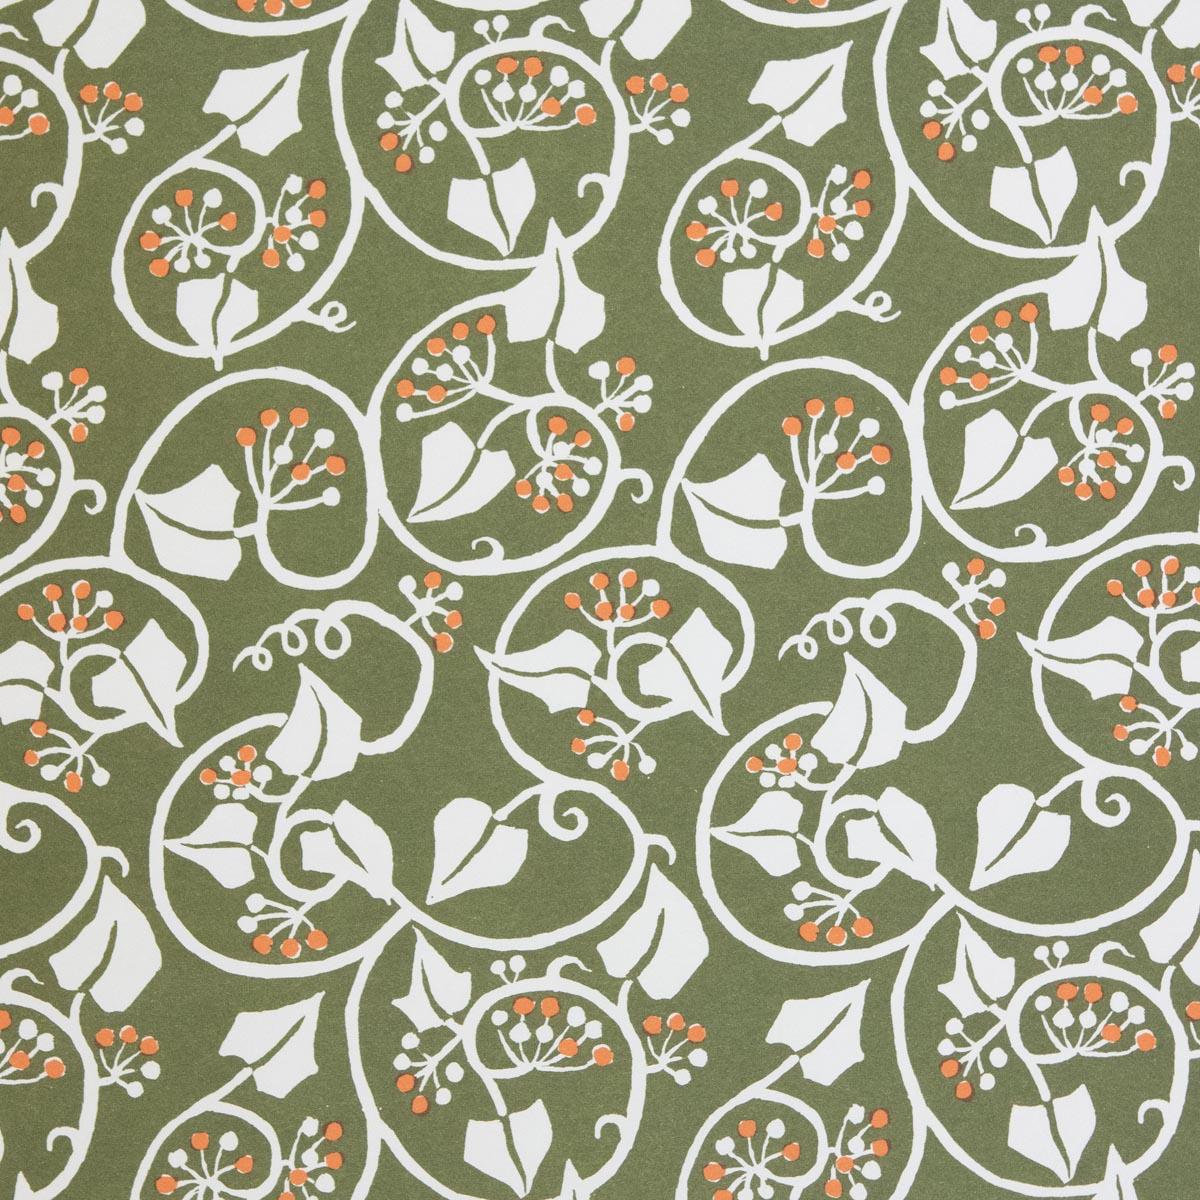 'Ivy Swamp Green' Wrapping Paper